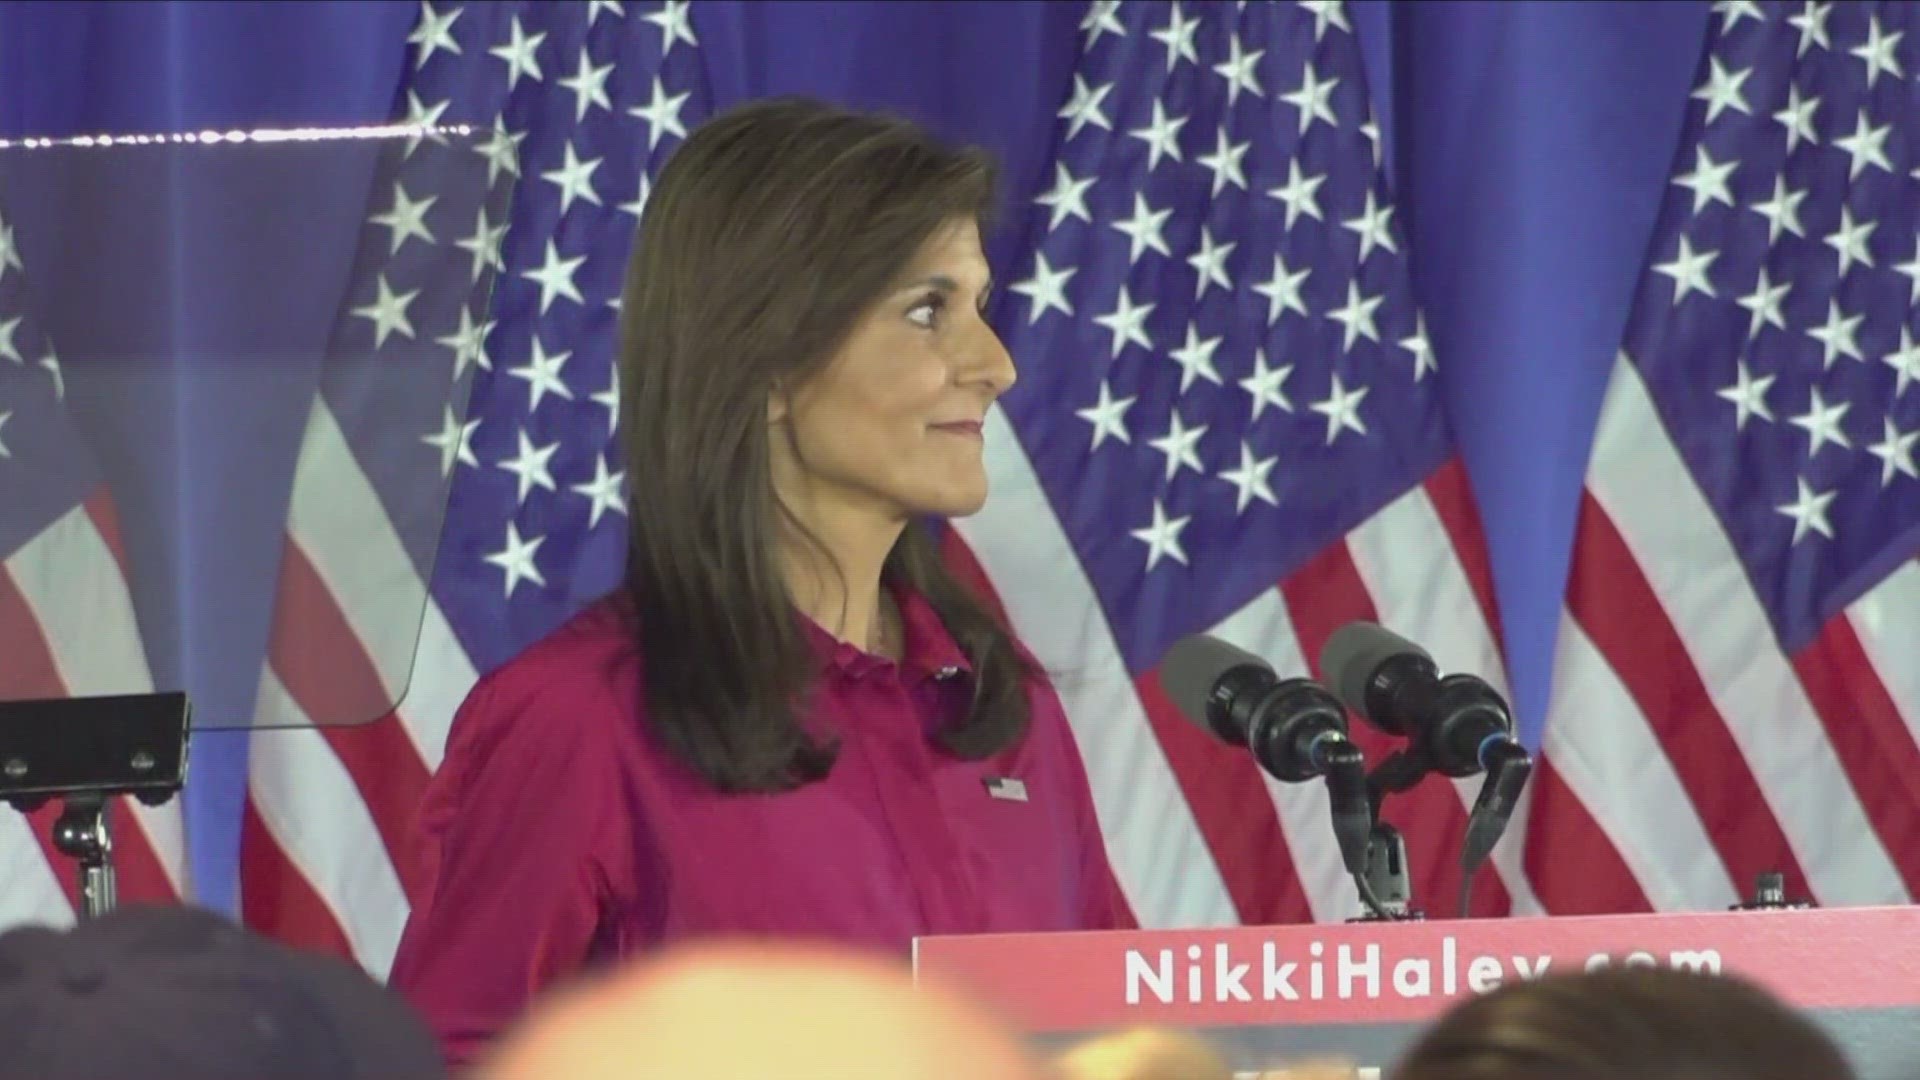 "The kindness of Iowans will never be lost on me," Haley said. "You're faithful, patriotic and hardworking Americans."